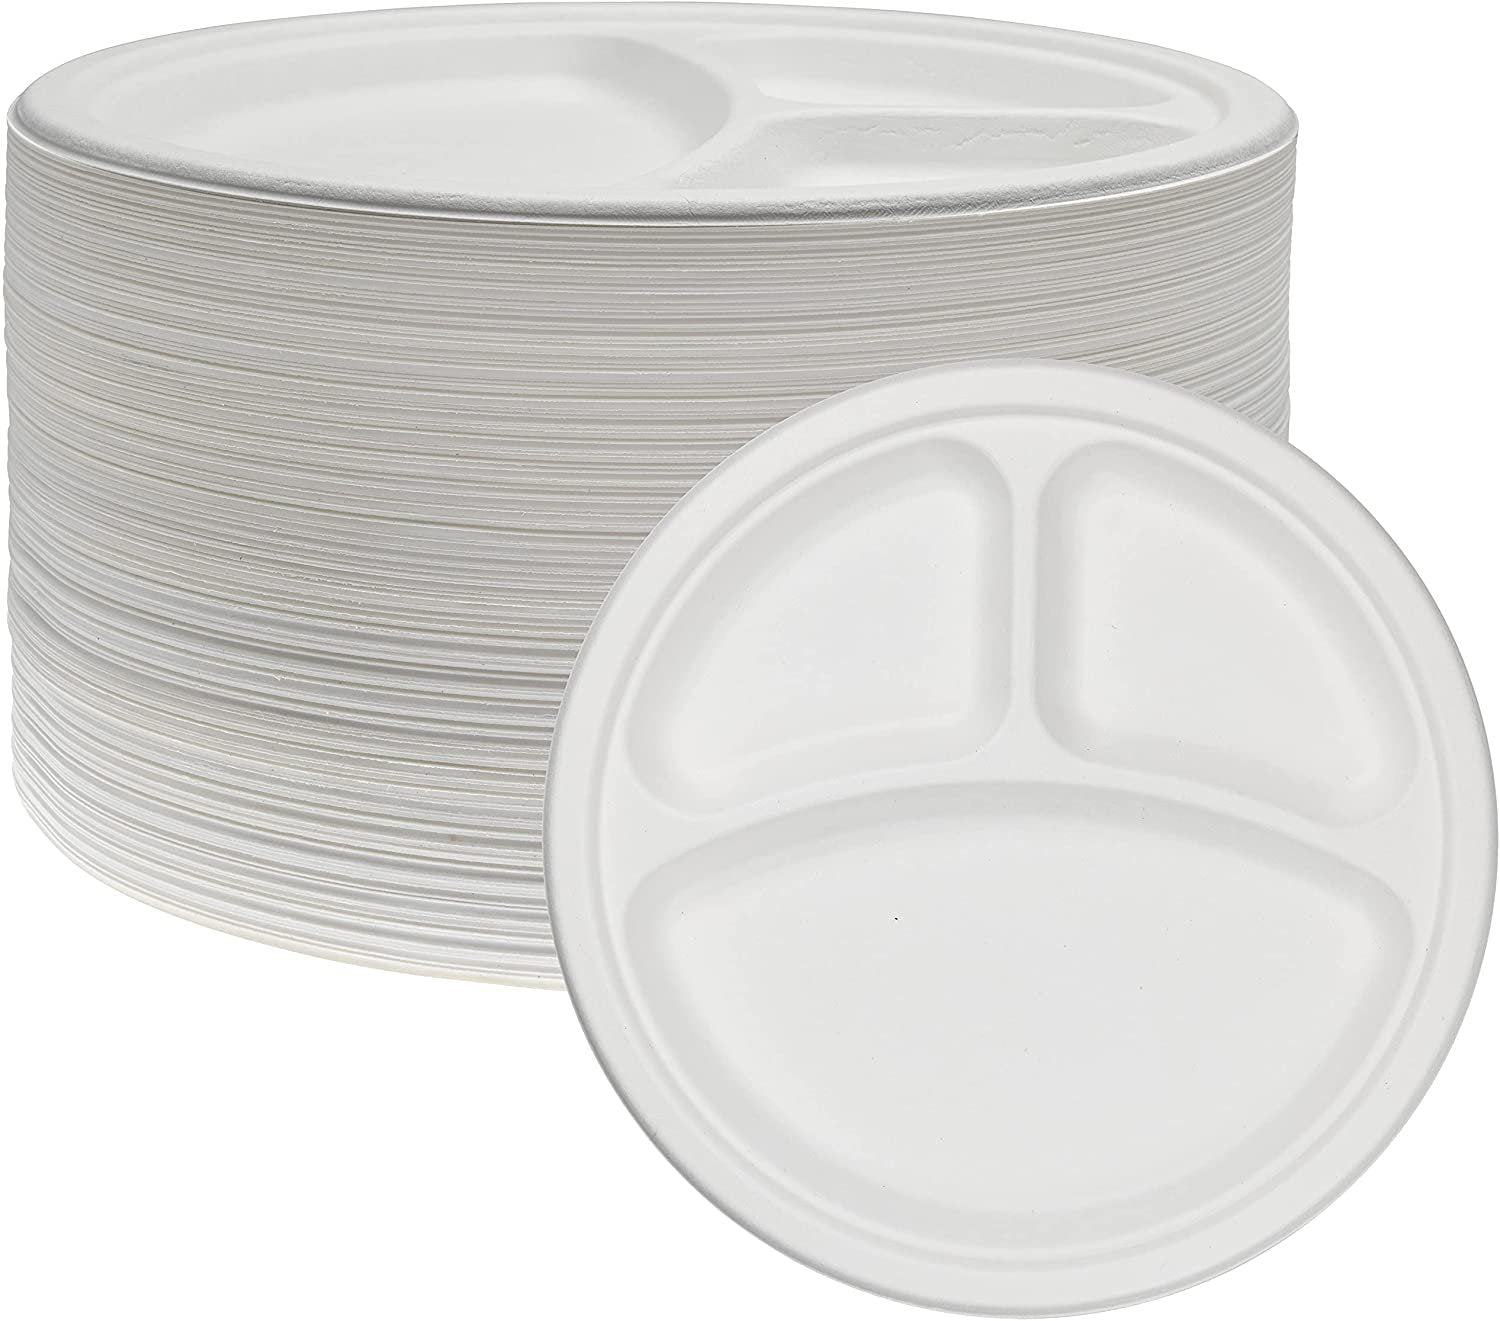 Highmark ECO Compostable Sugarcane Paper Plates 9 White Pack Of